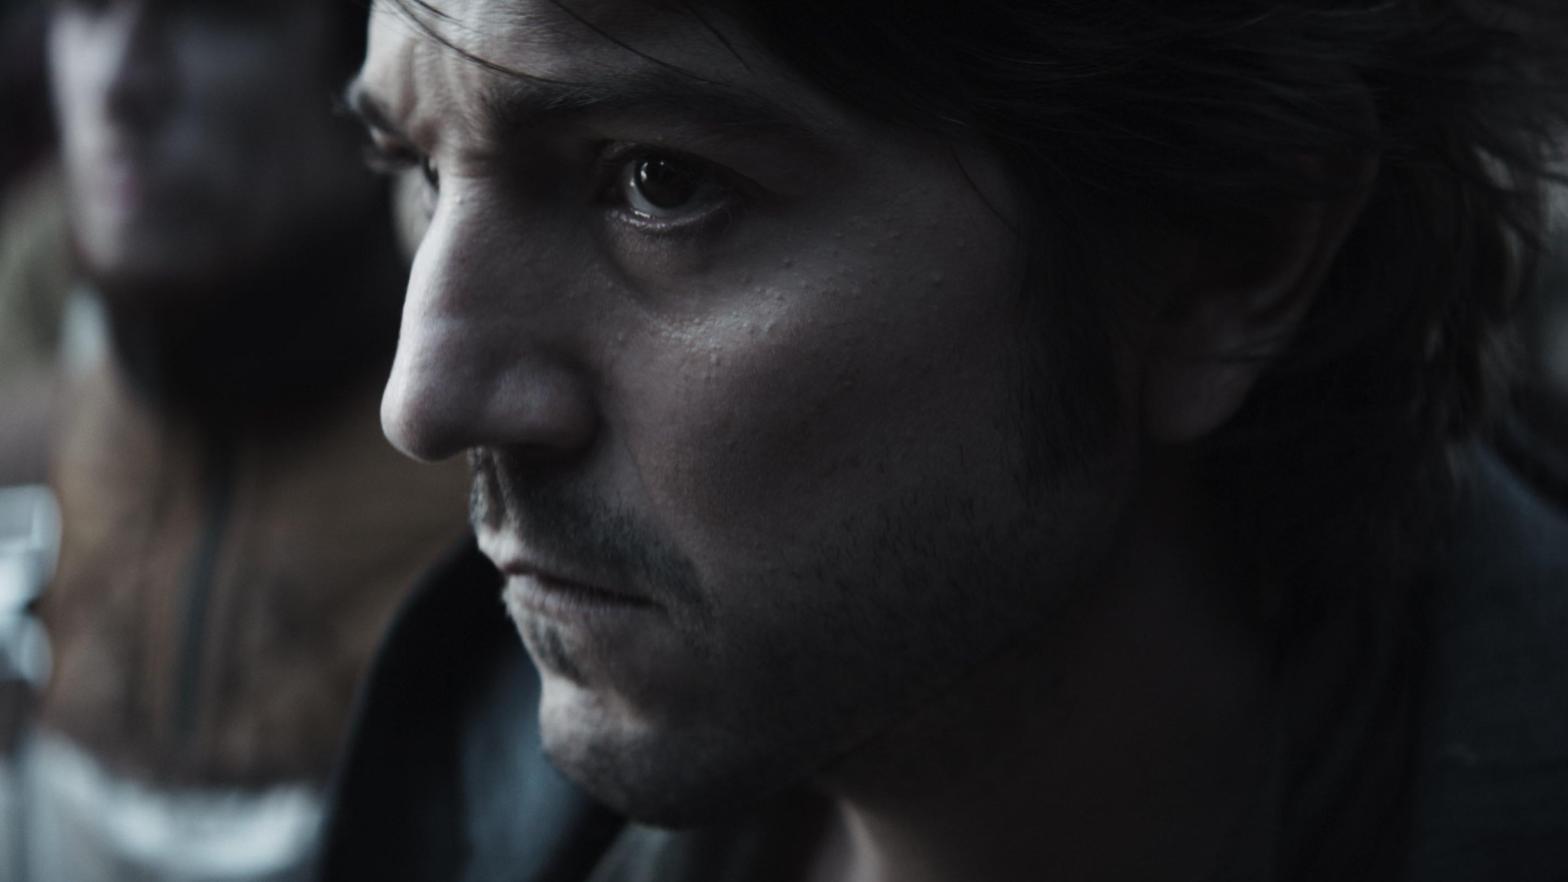 Diego Luna scrolling Twitter waiting for Andor reactions. (Image: Lucasfilm)